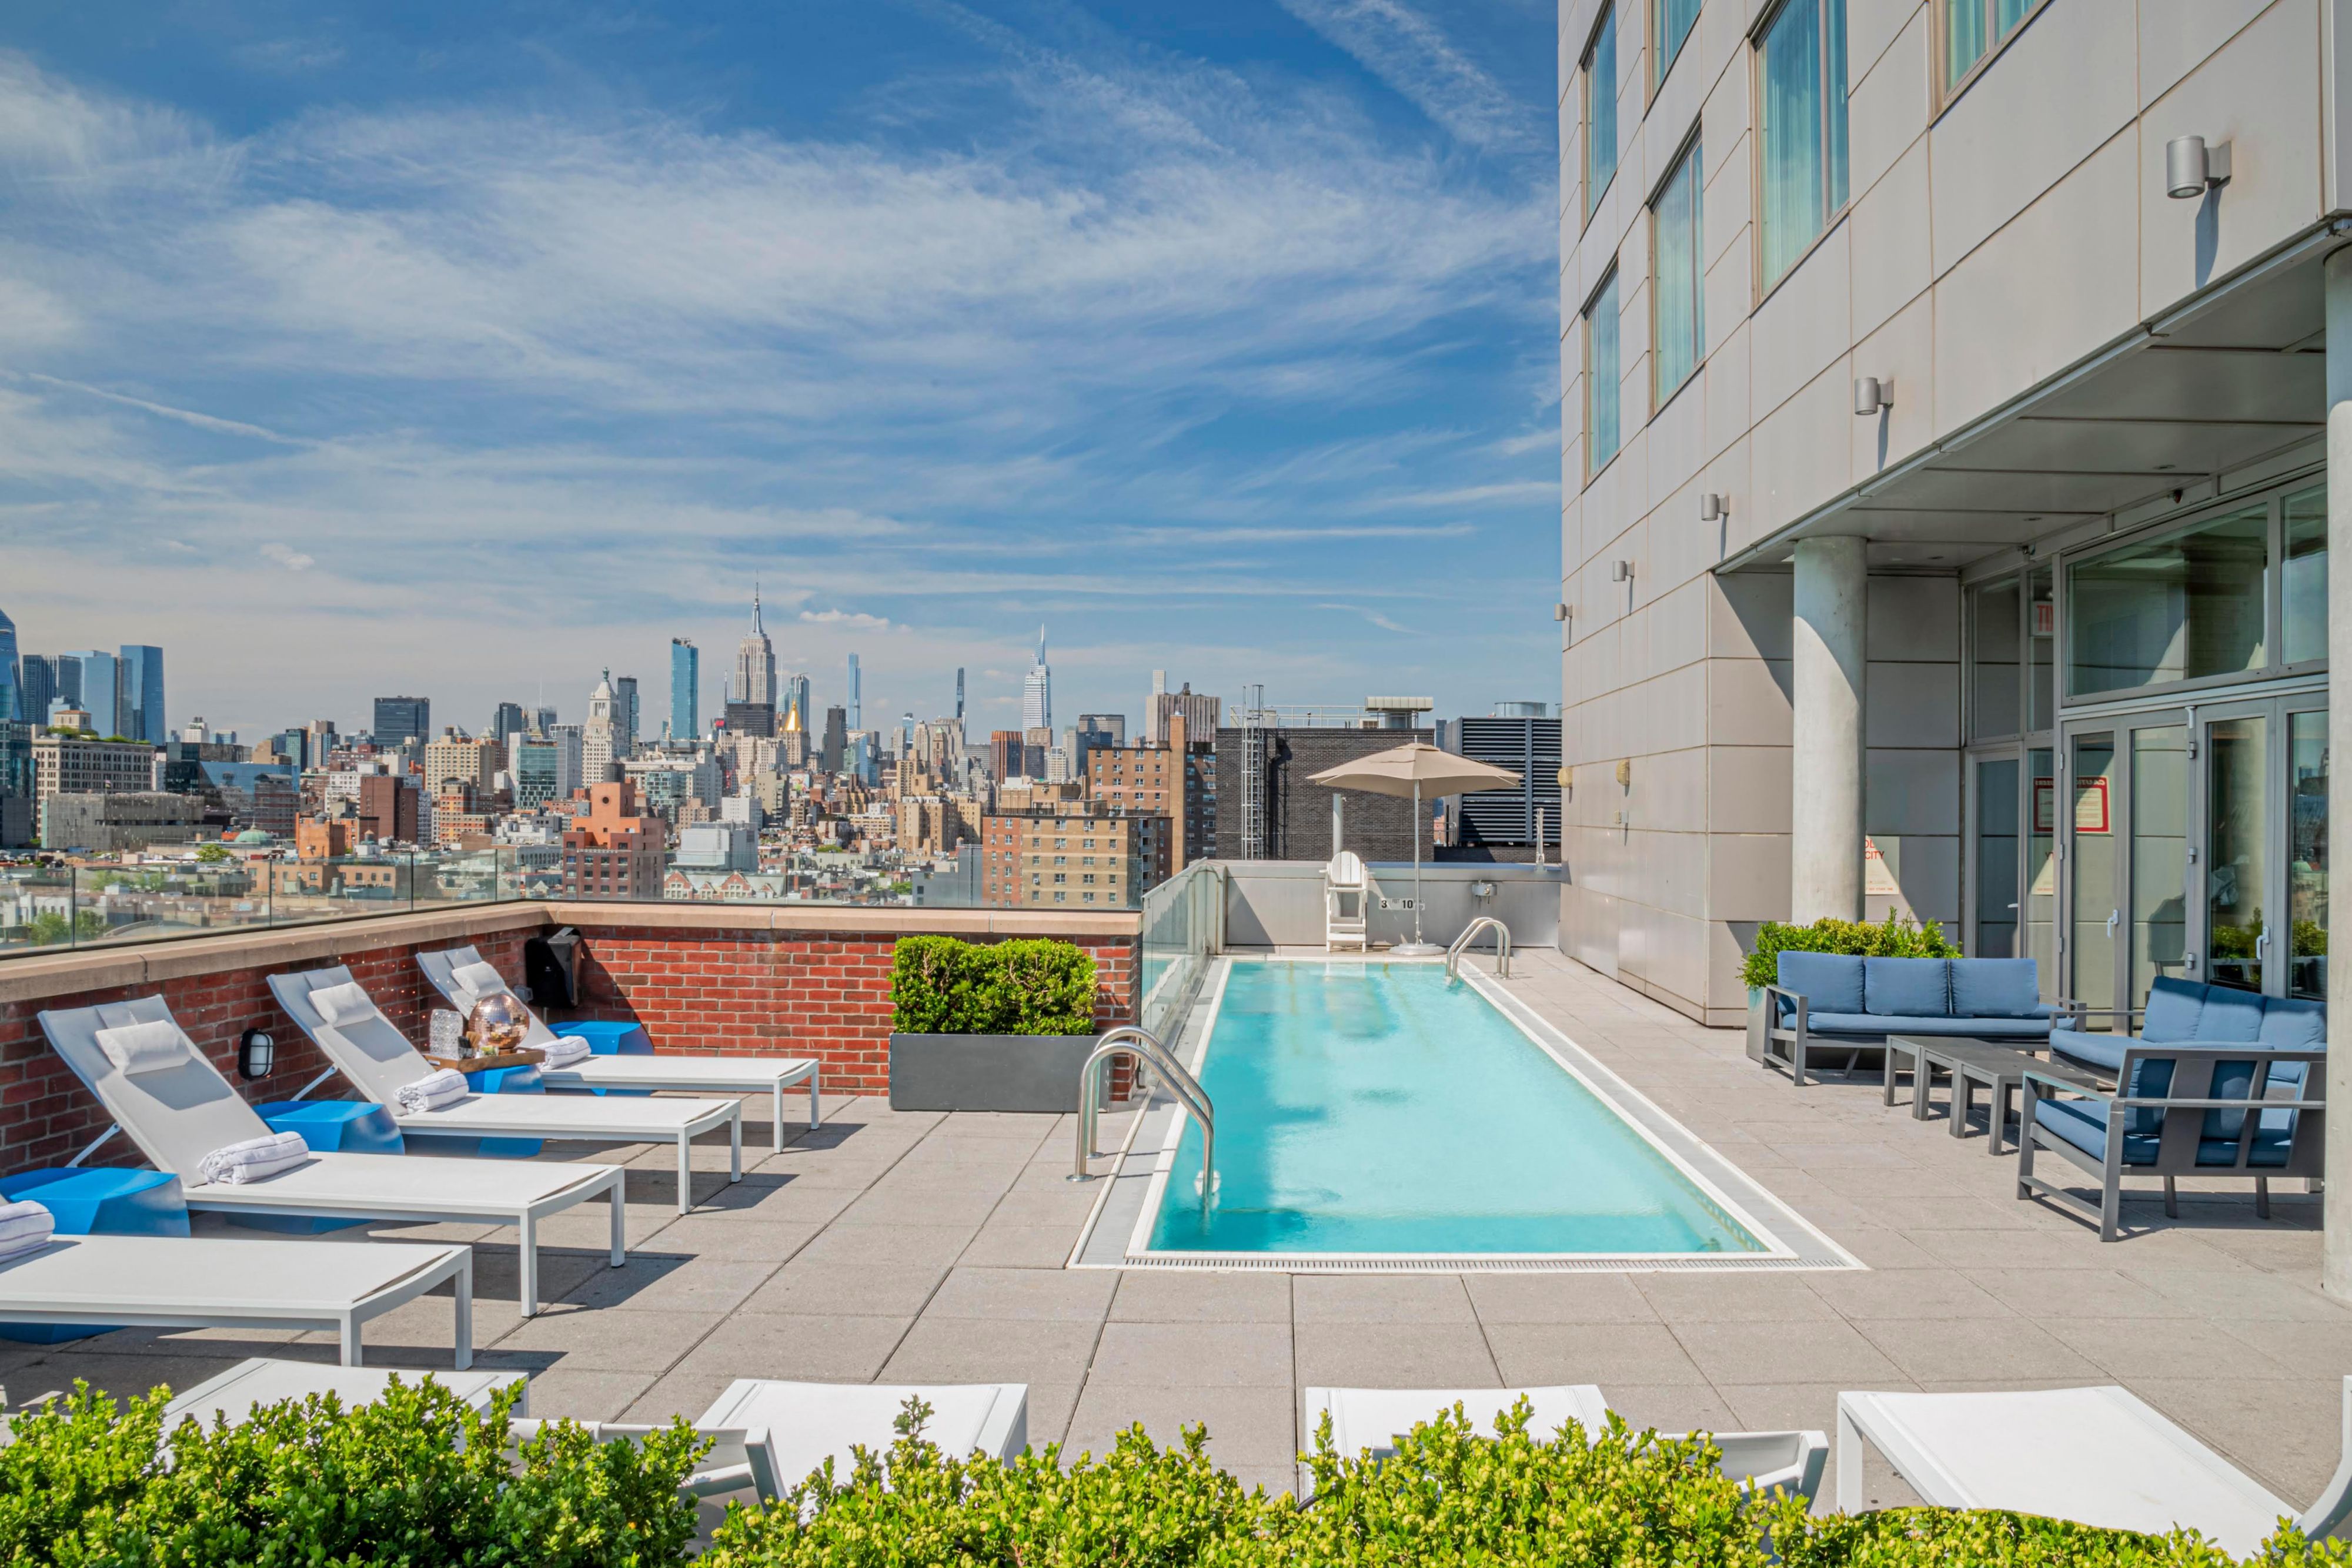 Cool off in our seasonal rooftop pool, open late spring and summer months, where you can enjoy the water with a sweeping view of the city. When you’re not soaking in the pool, you can relax in a comfortable deck chair. Grab a drink from Mr. Purple, our rooftop bar, to sip while the stress melts away.